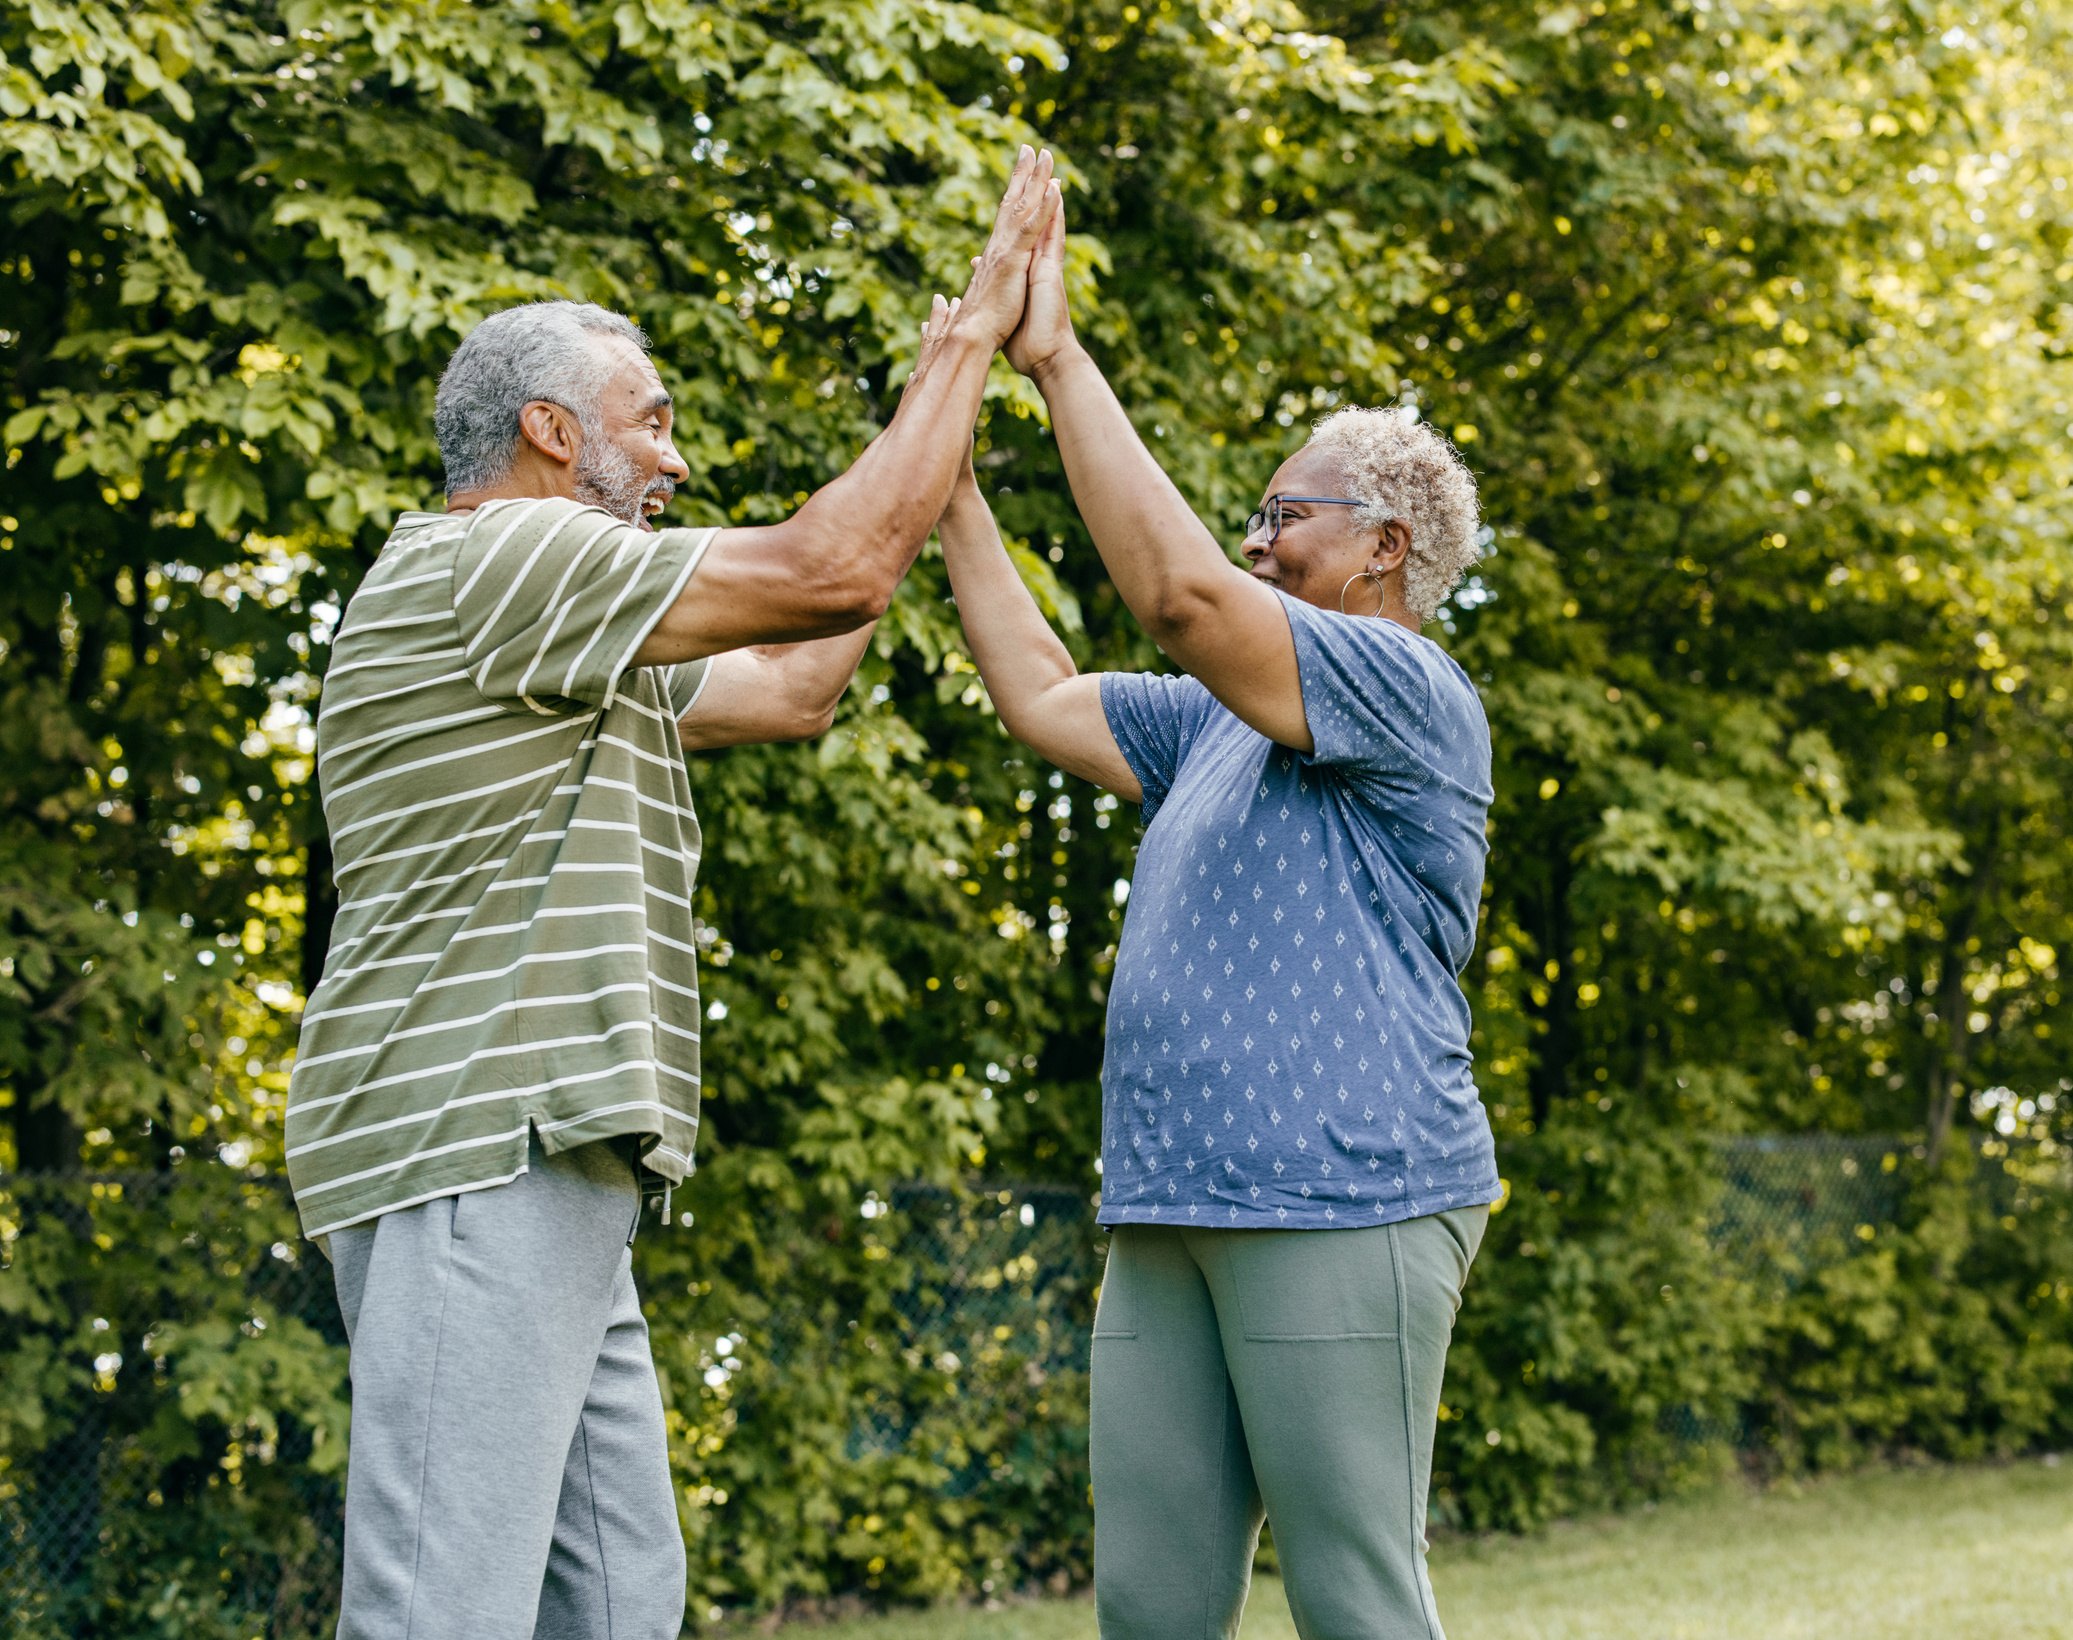 Regular Physical Activity Benefits for Older Adults